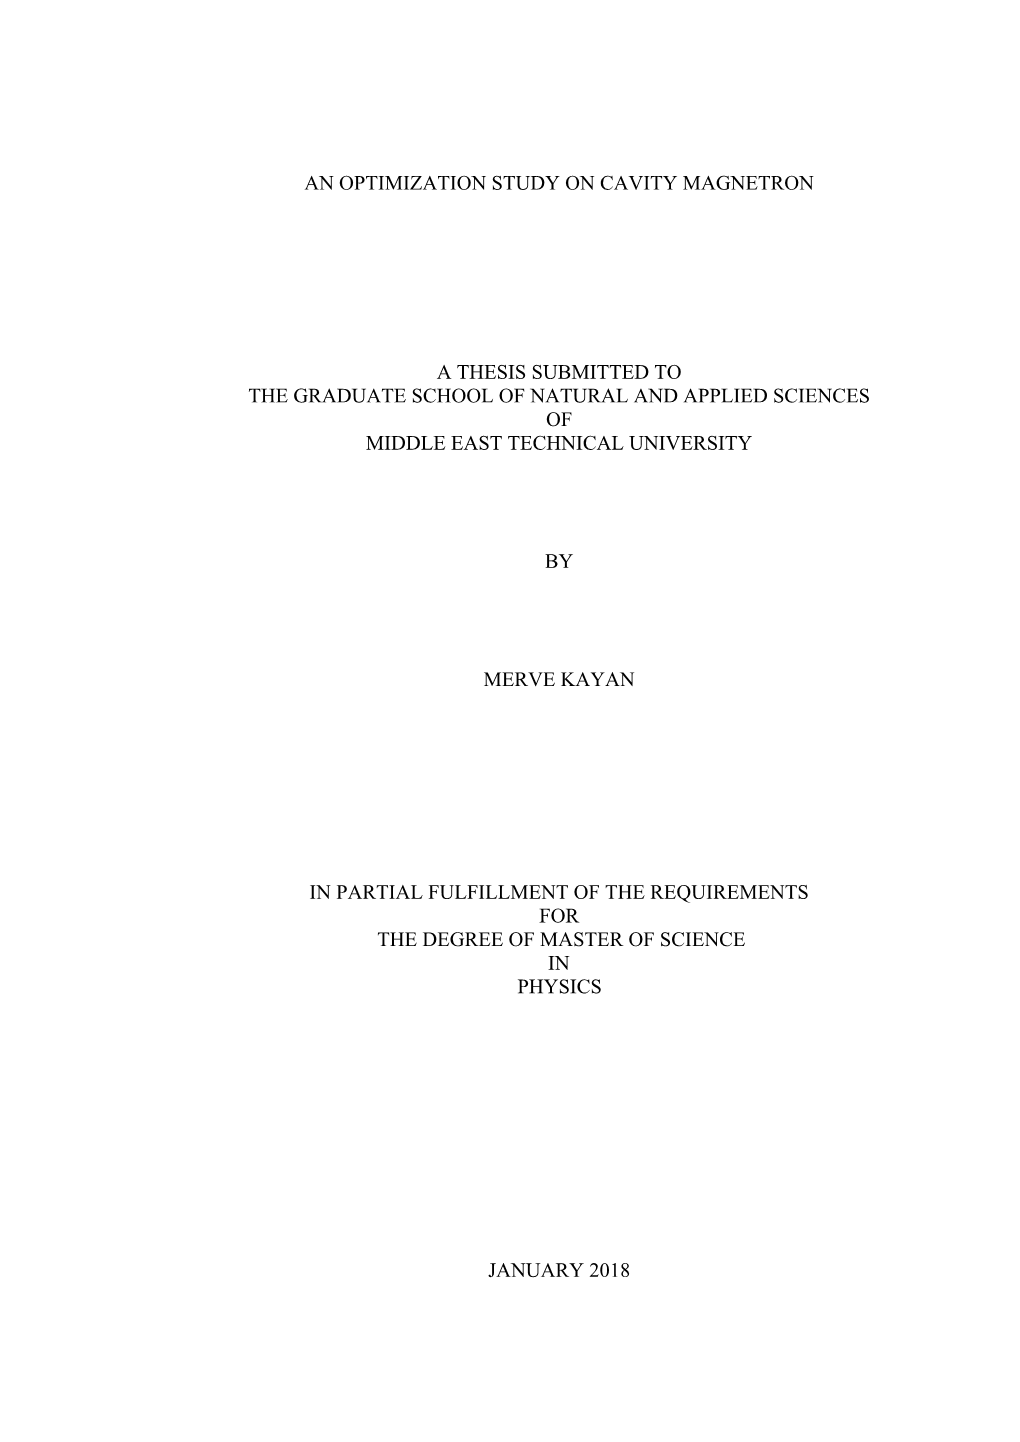 An Optimization Study on Cavity Magnetron a Thesis Submitted to the Graduate School of Natural and Applied Sciences of Middle Ea